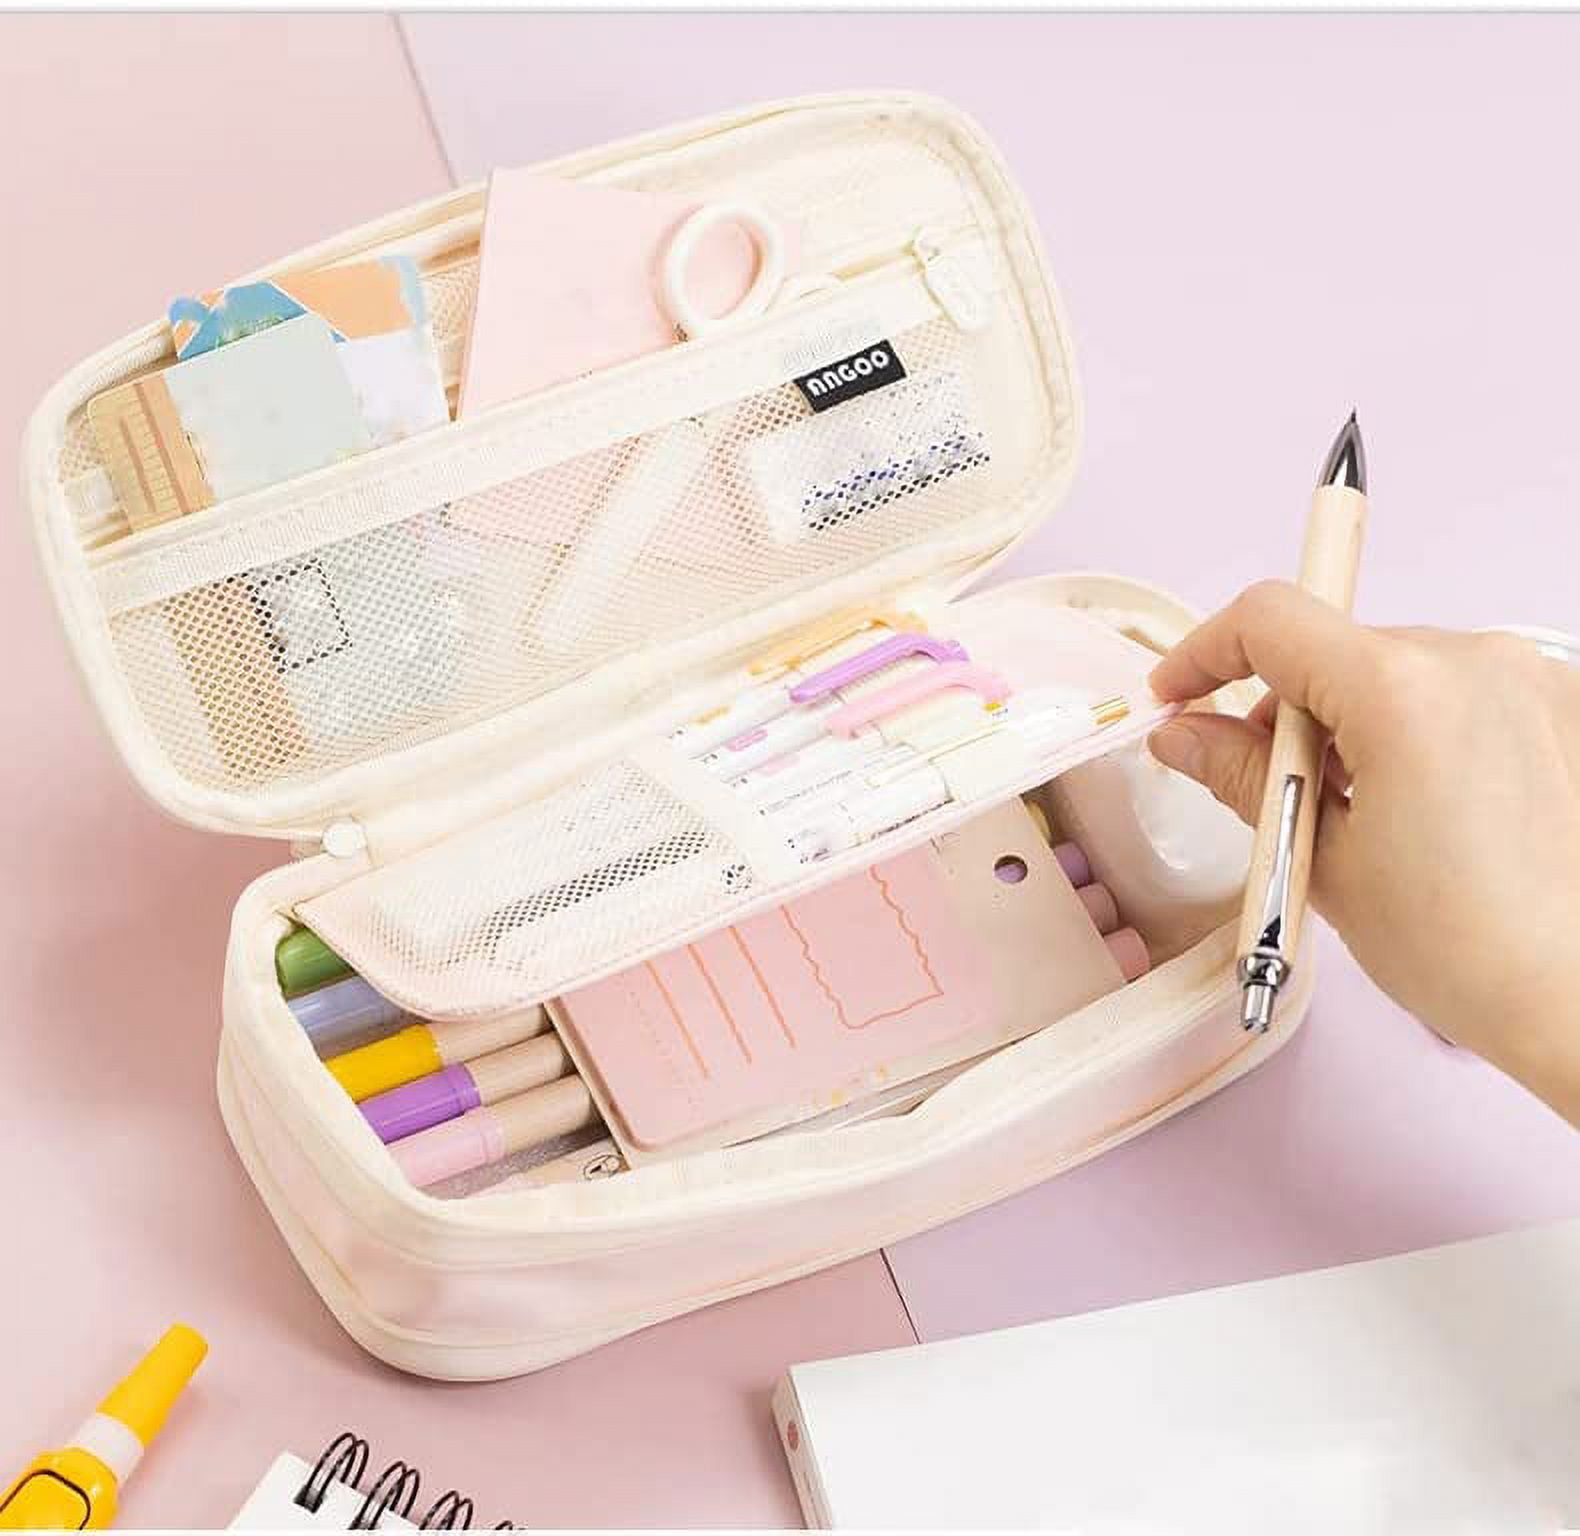  Homecube Pencil Case Capacious Pen Pencil Holder Box Makeup Pens  Pouch Oxford Cloth Bag Large Storage Stationery Organizer with Zipper for  School & Office - Gray : Arts, Crafts & Sewing